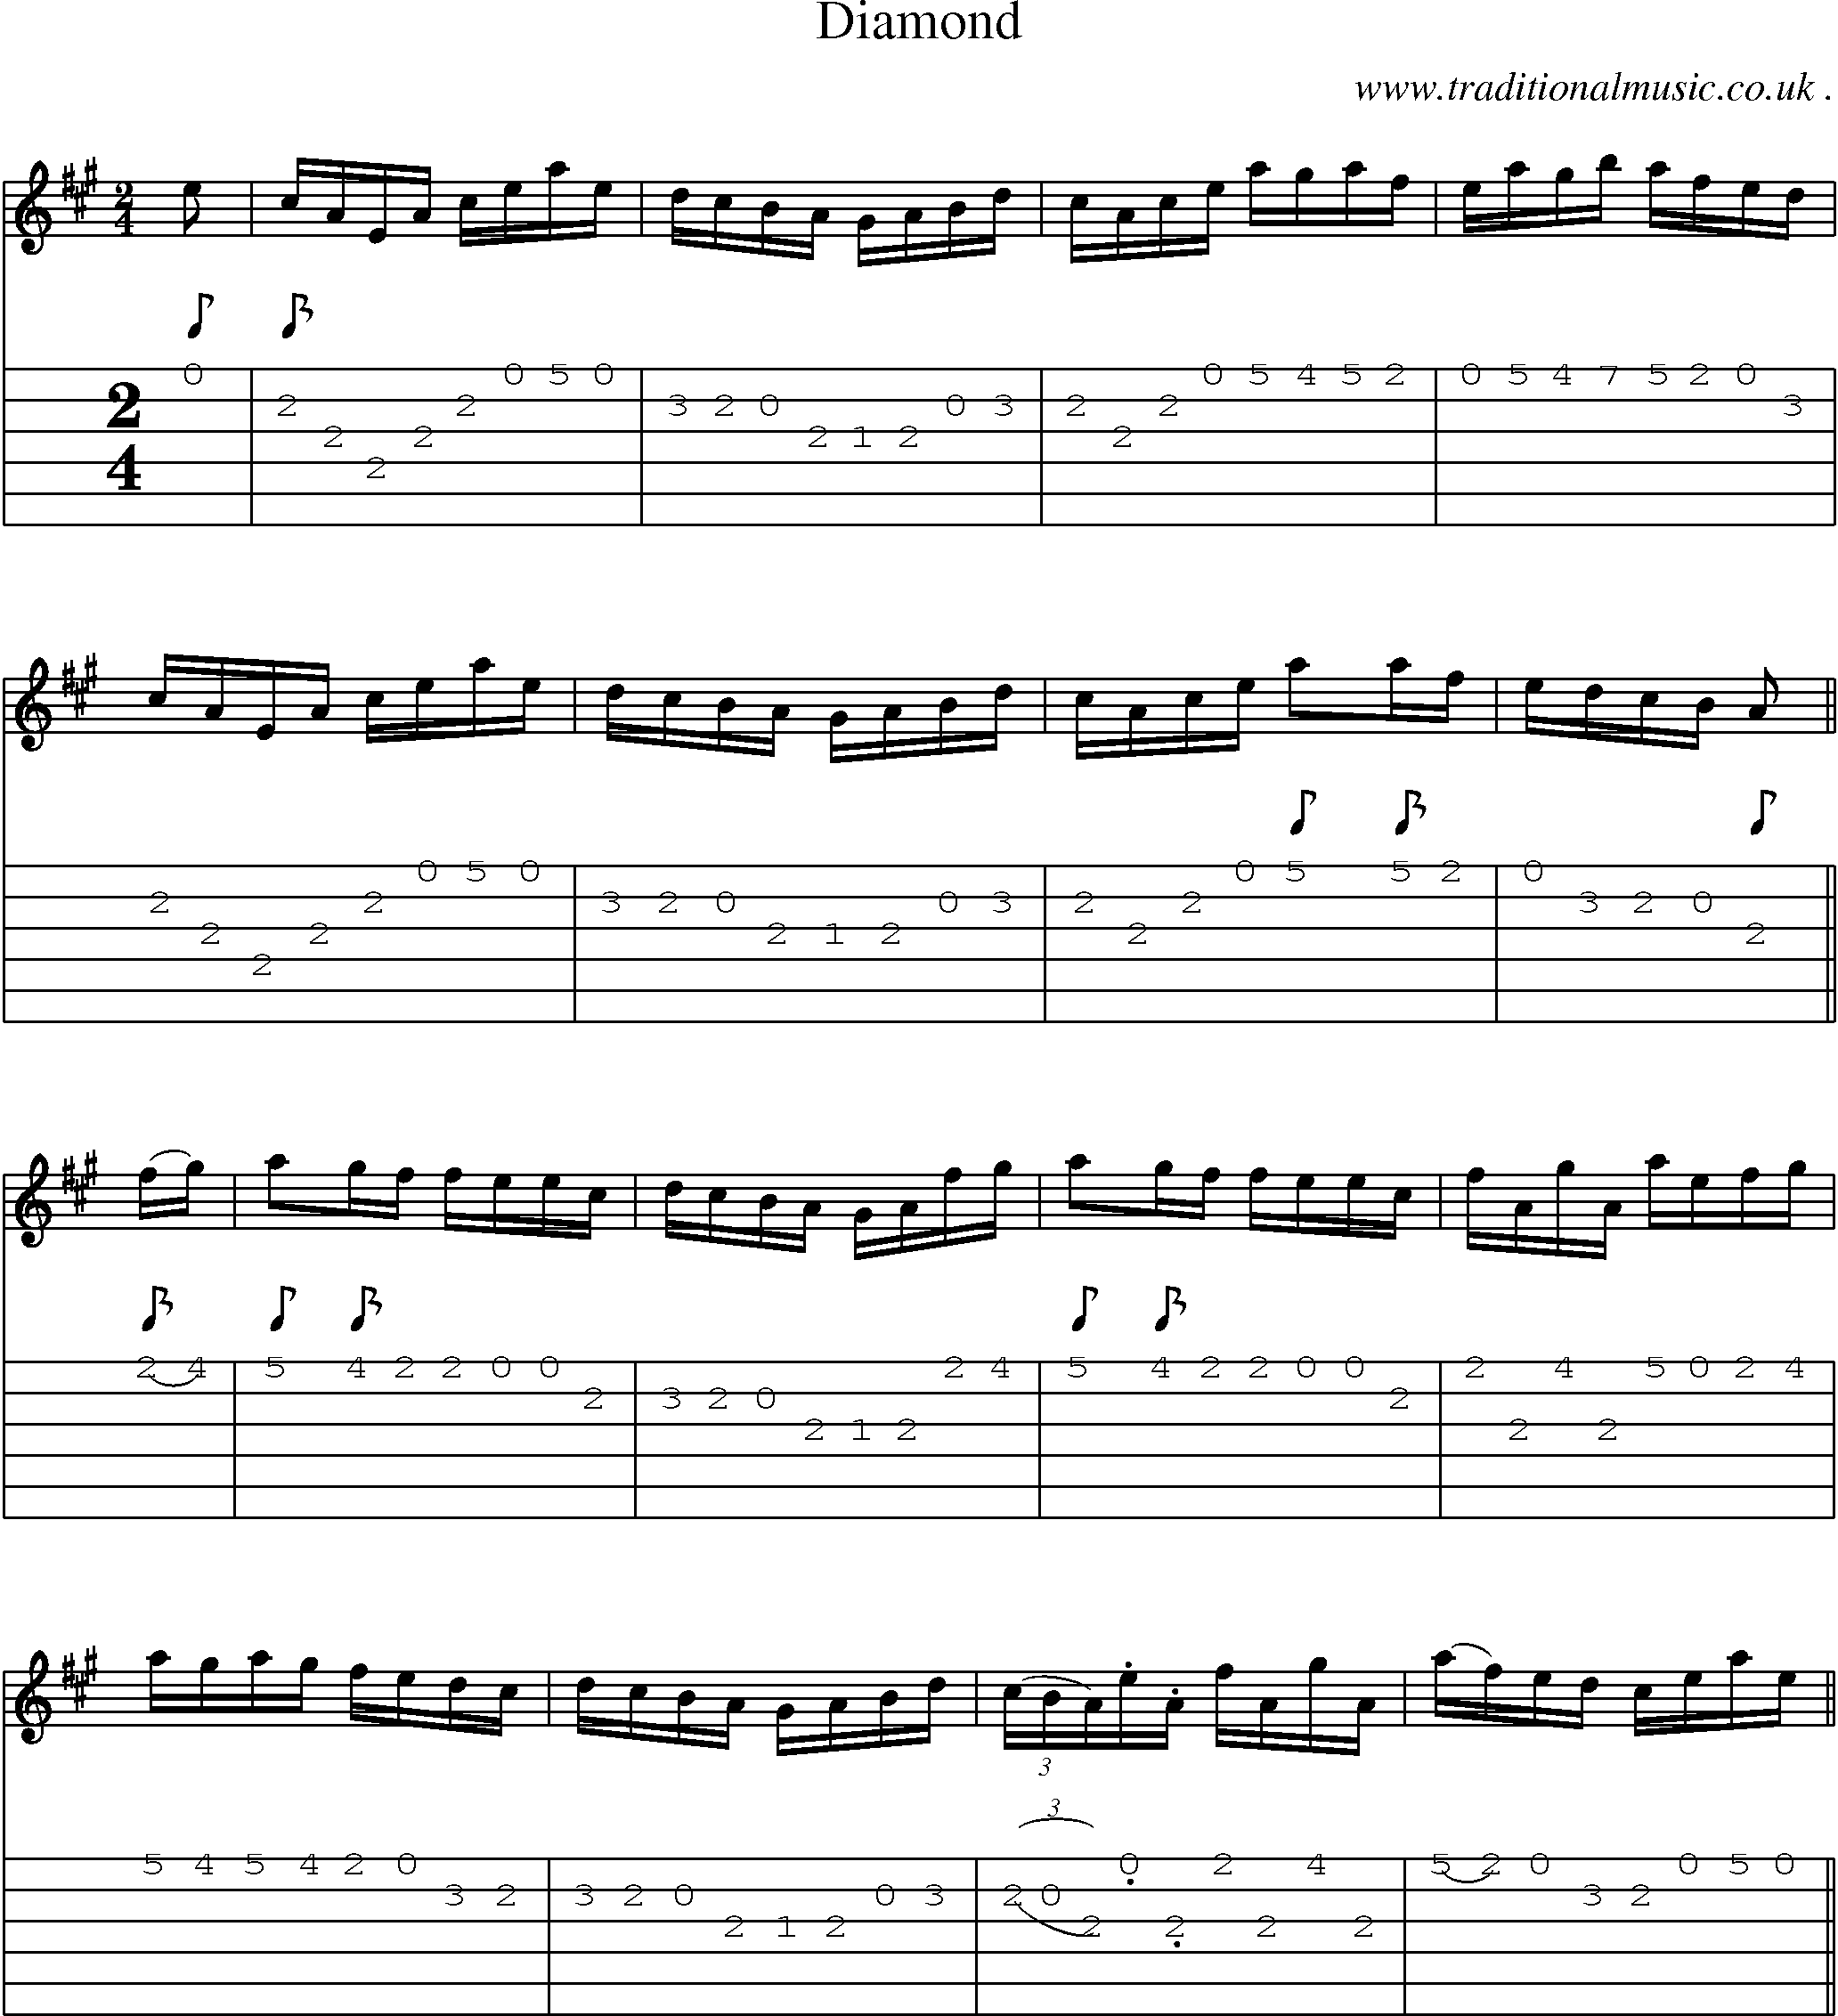 Sheet-Music and Guitar Tabs for Diamond